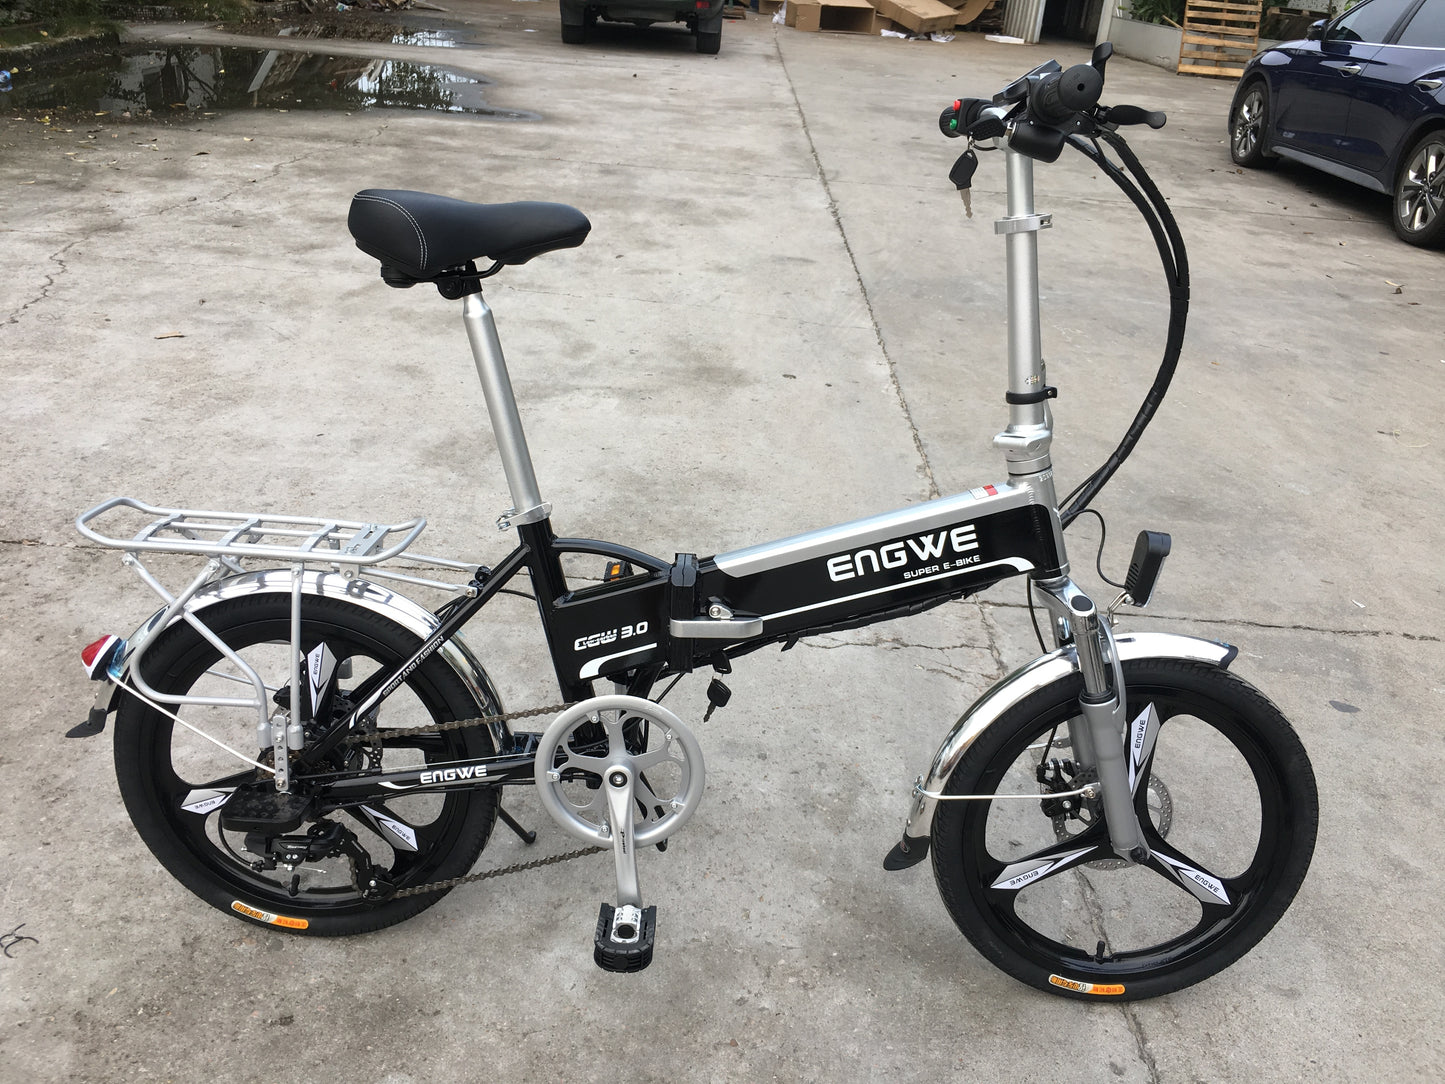 Electric bike - 20 inch Aluminum Foldable Bicycle with 400W Powerful